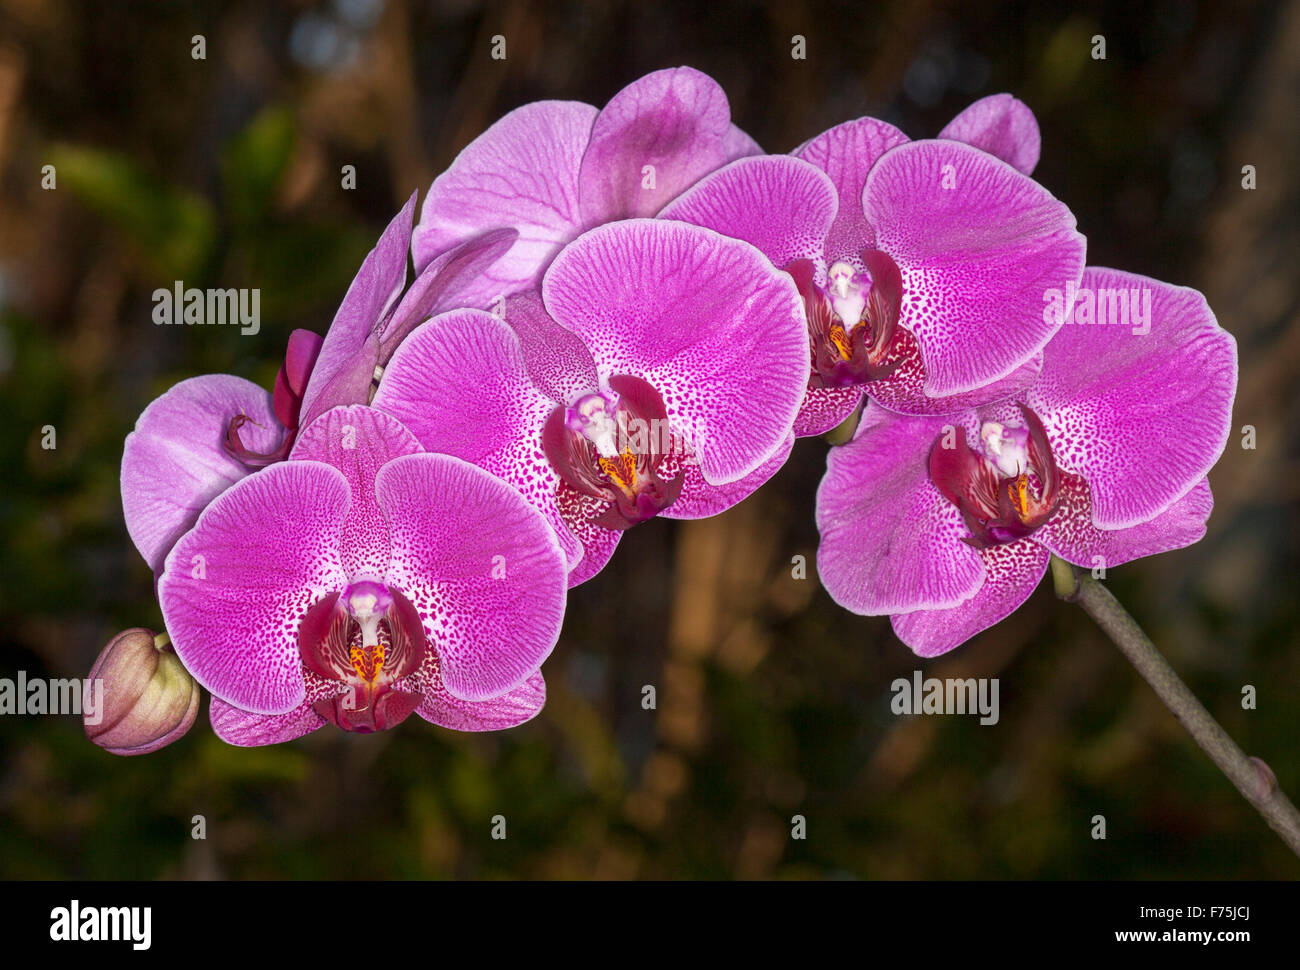 Large spray of bright magenta / purple flowers with white spotted throats of Phalaenopsis moth orchid against dark background Stock Photo